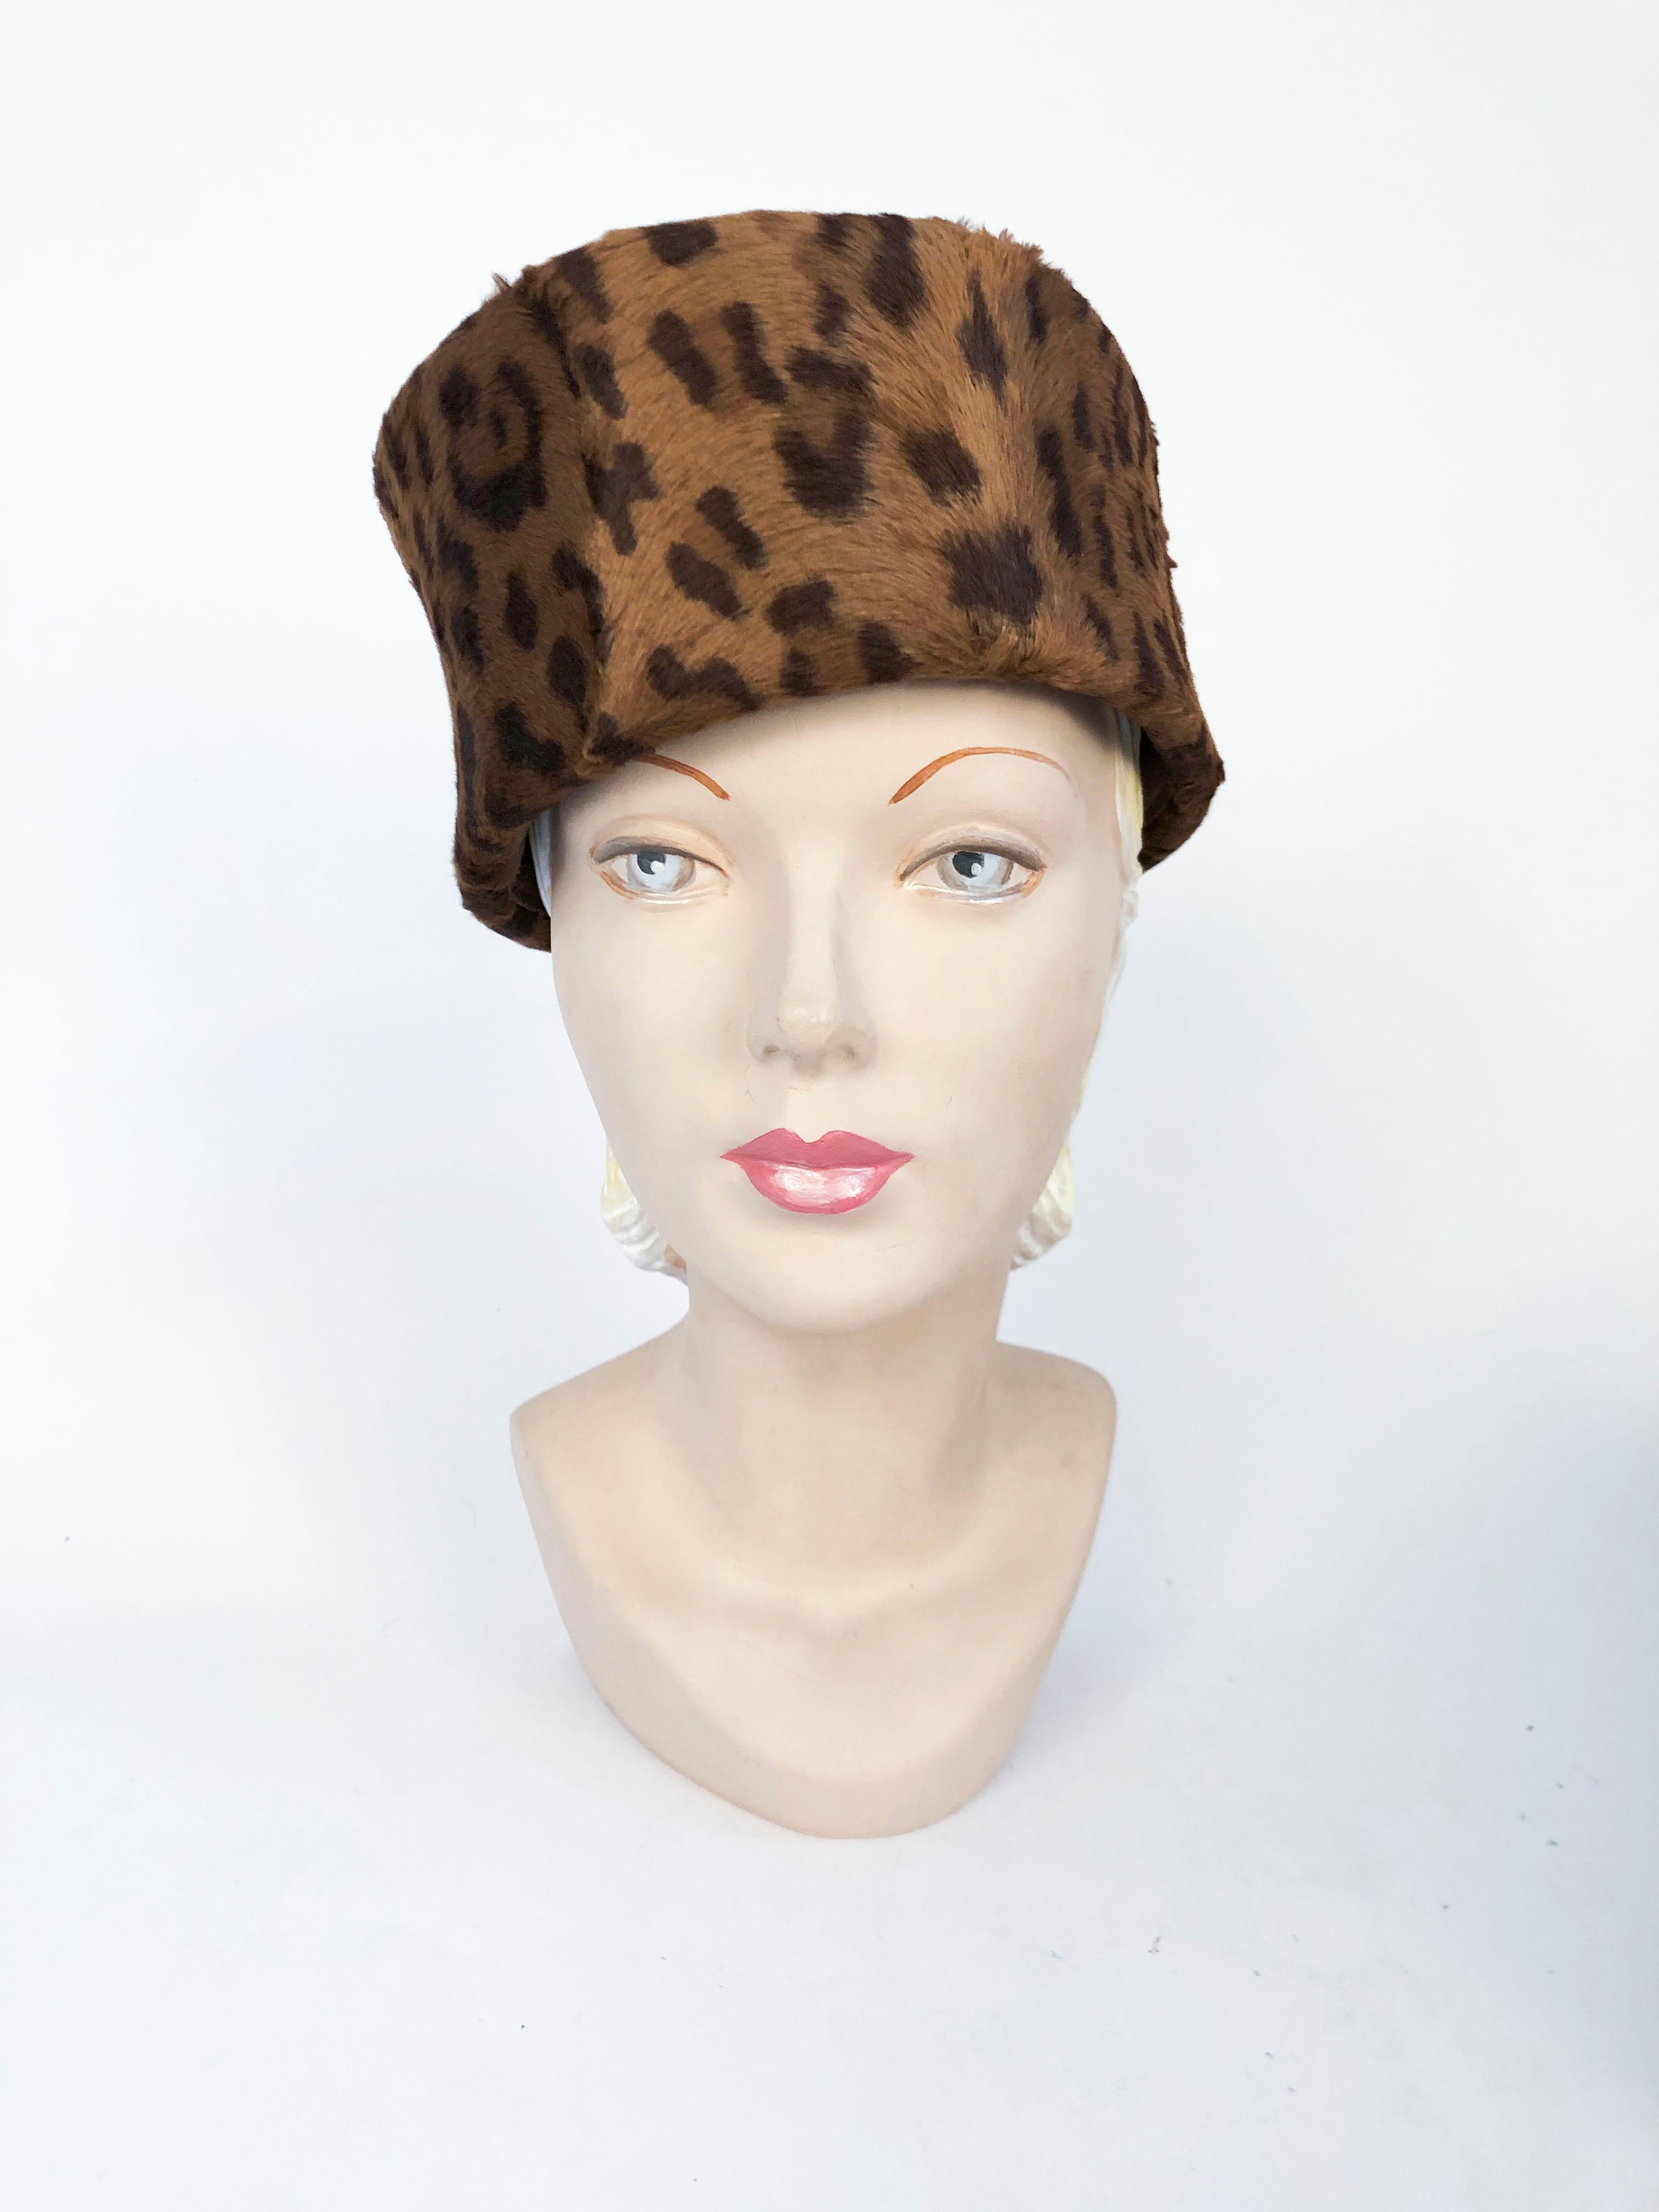 1980's Cheetah Print Pillbox Hat with Matching Gloves. This cheetah printed hi-pile fabric pillbox hat features natural texture that imitates genuine fur. It also has matching gloves that have gauntlet style cuffs.